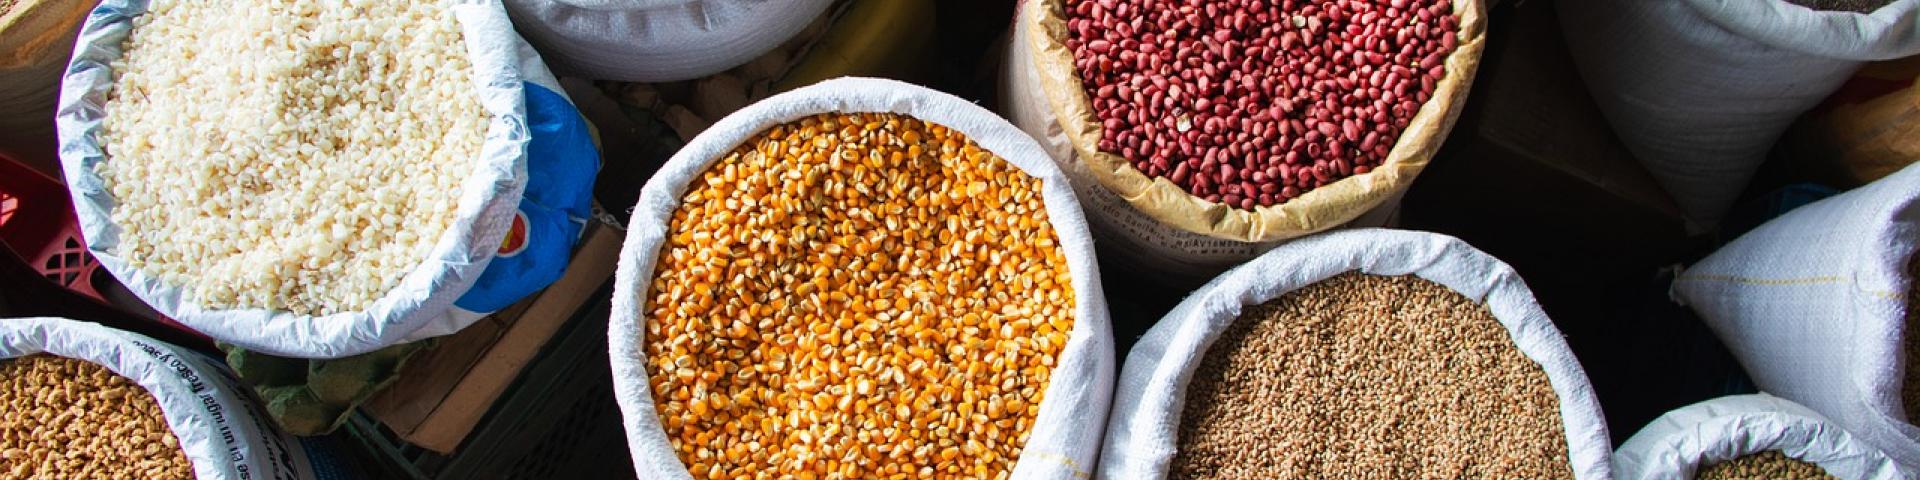 Grains and pulses in bags